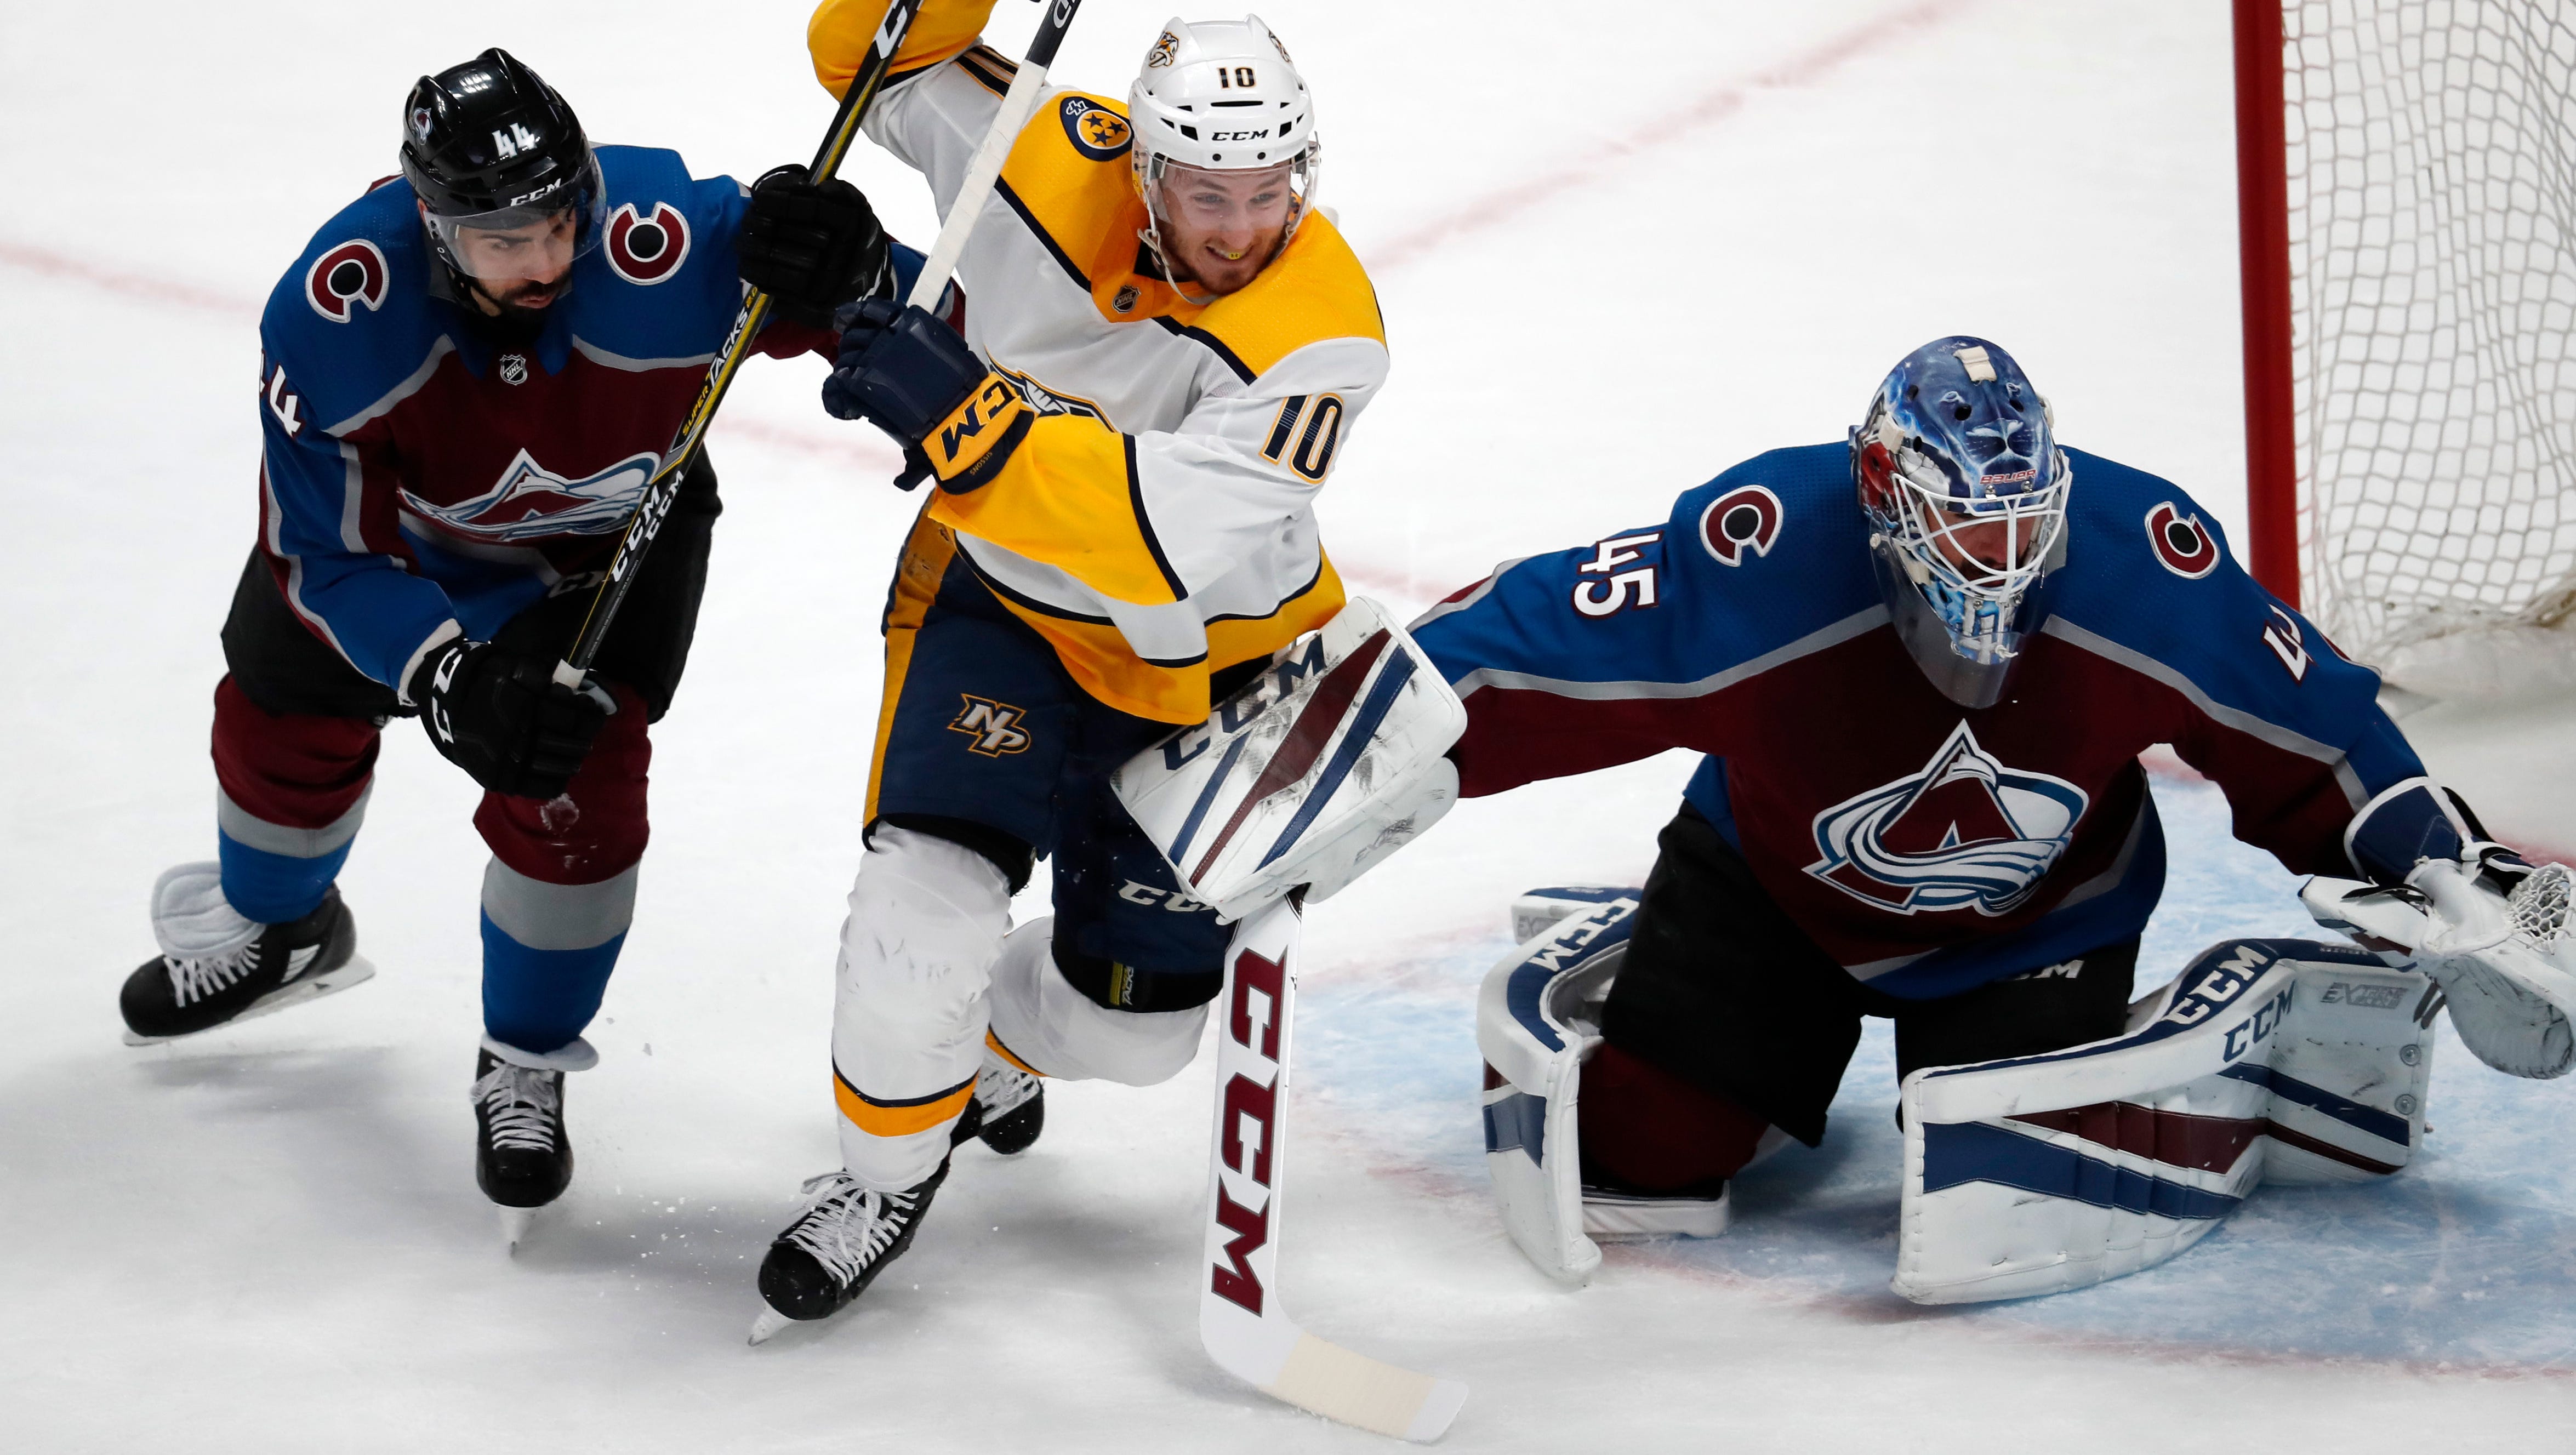 Nashville Predators center Colton Sissons fights to pursue the puck between Colorado Avalanche defenseman Mark Barberio, left, and goaltender Jonathan Bernier during the first period of Game 4 of a first-round playoff series Wednesday, April 18, 2018, in Denver.